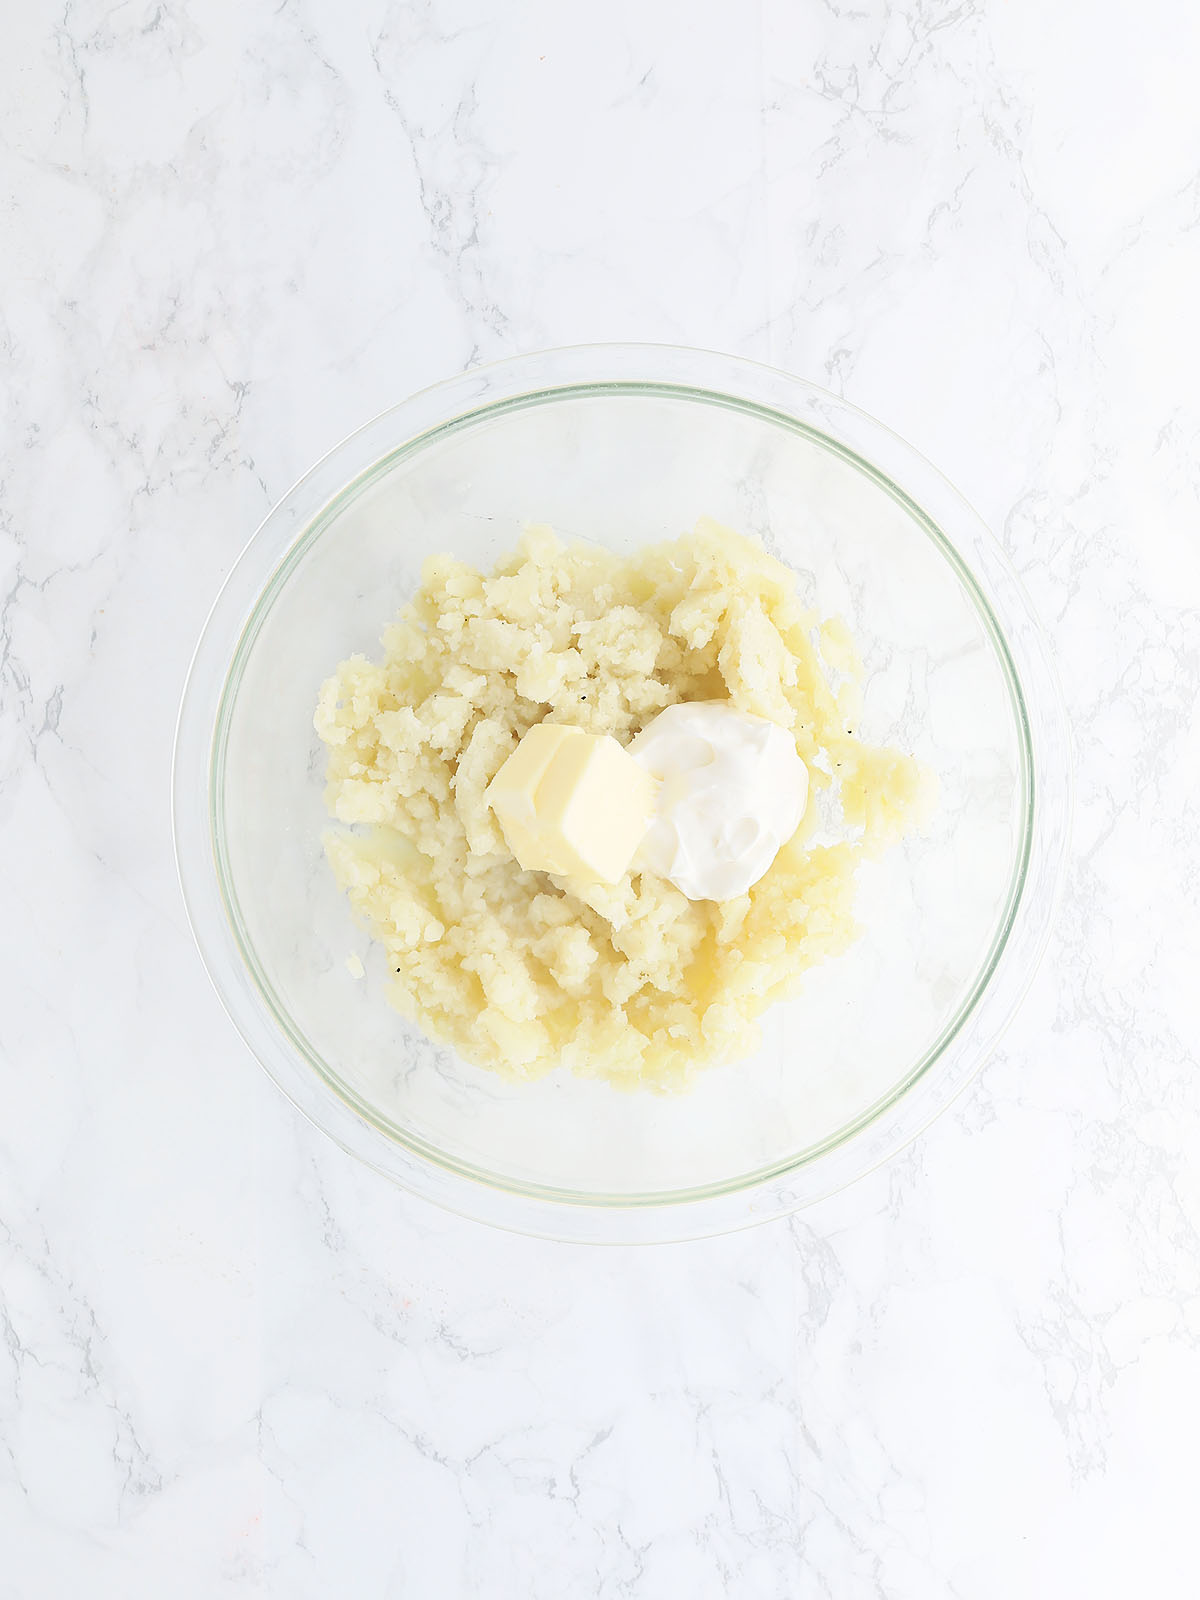 mashed potatoes, softened butter and sour cream in a glass mixing bowl